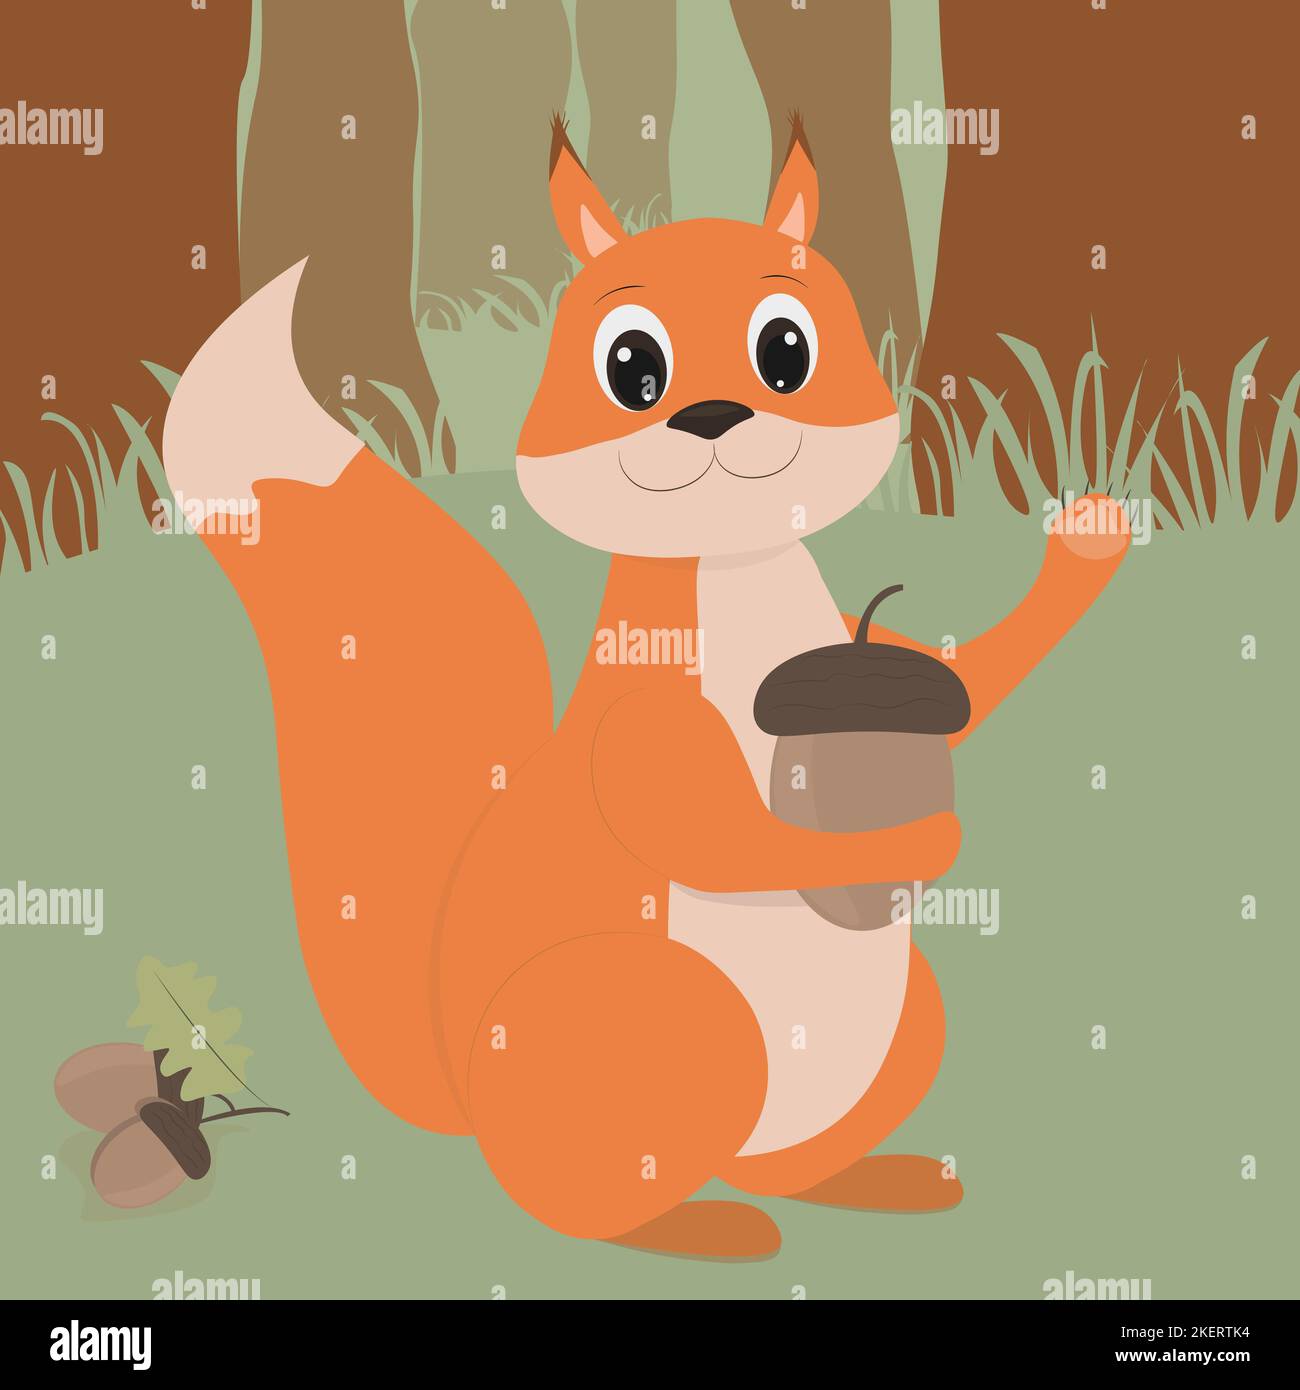 Children Cartoon character squirrel in the forest Stock Photo